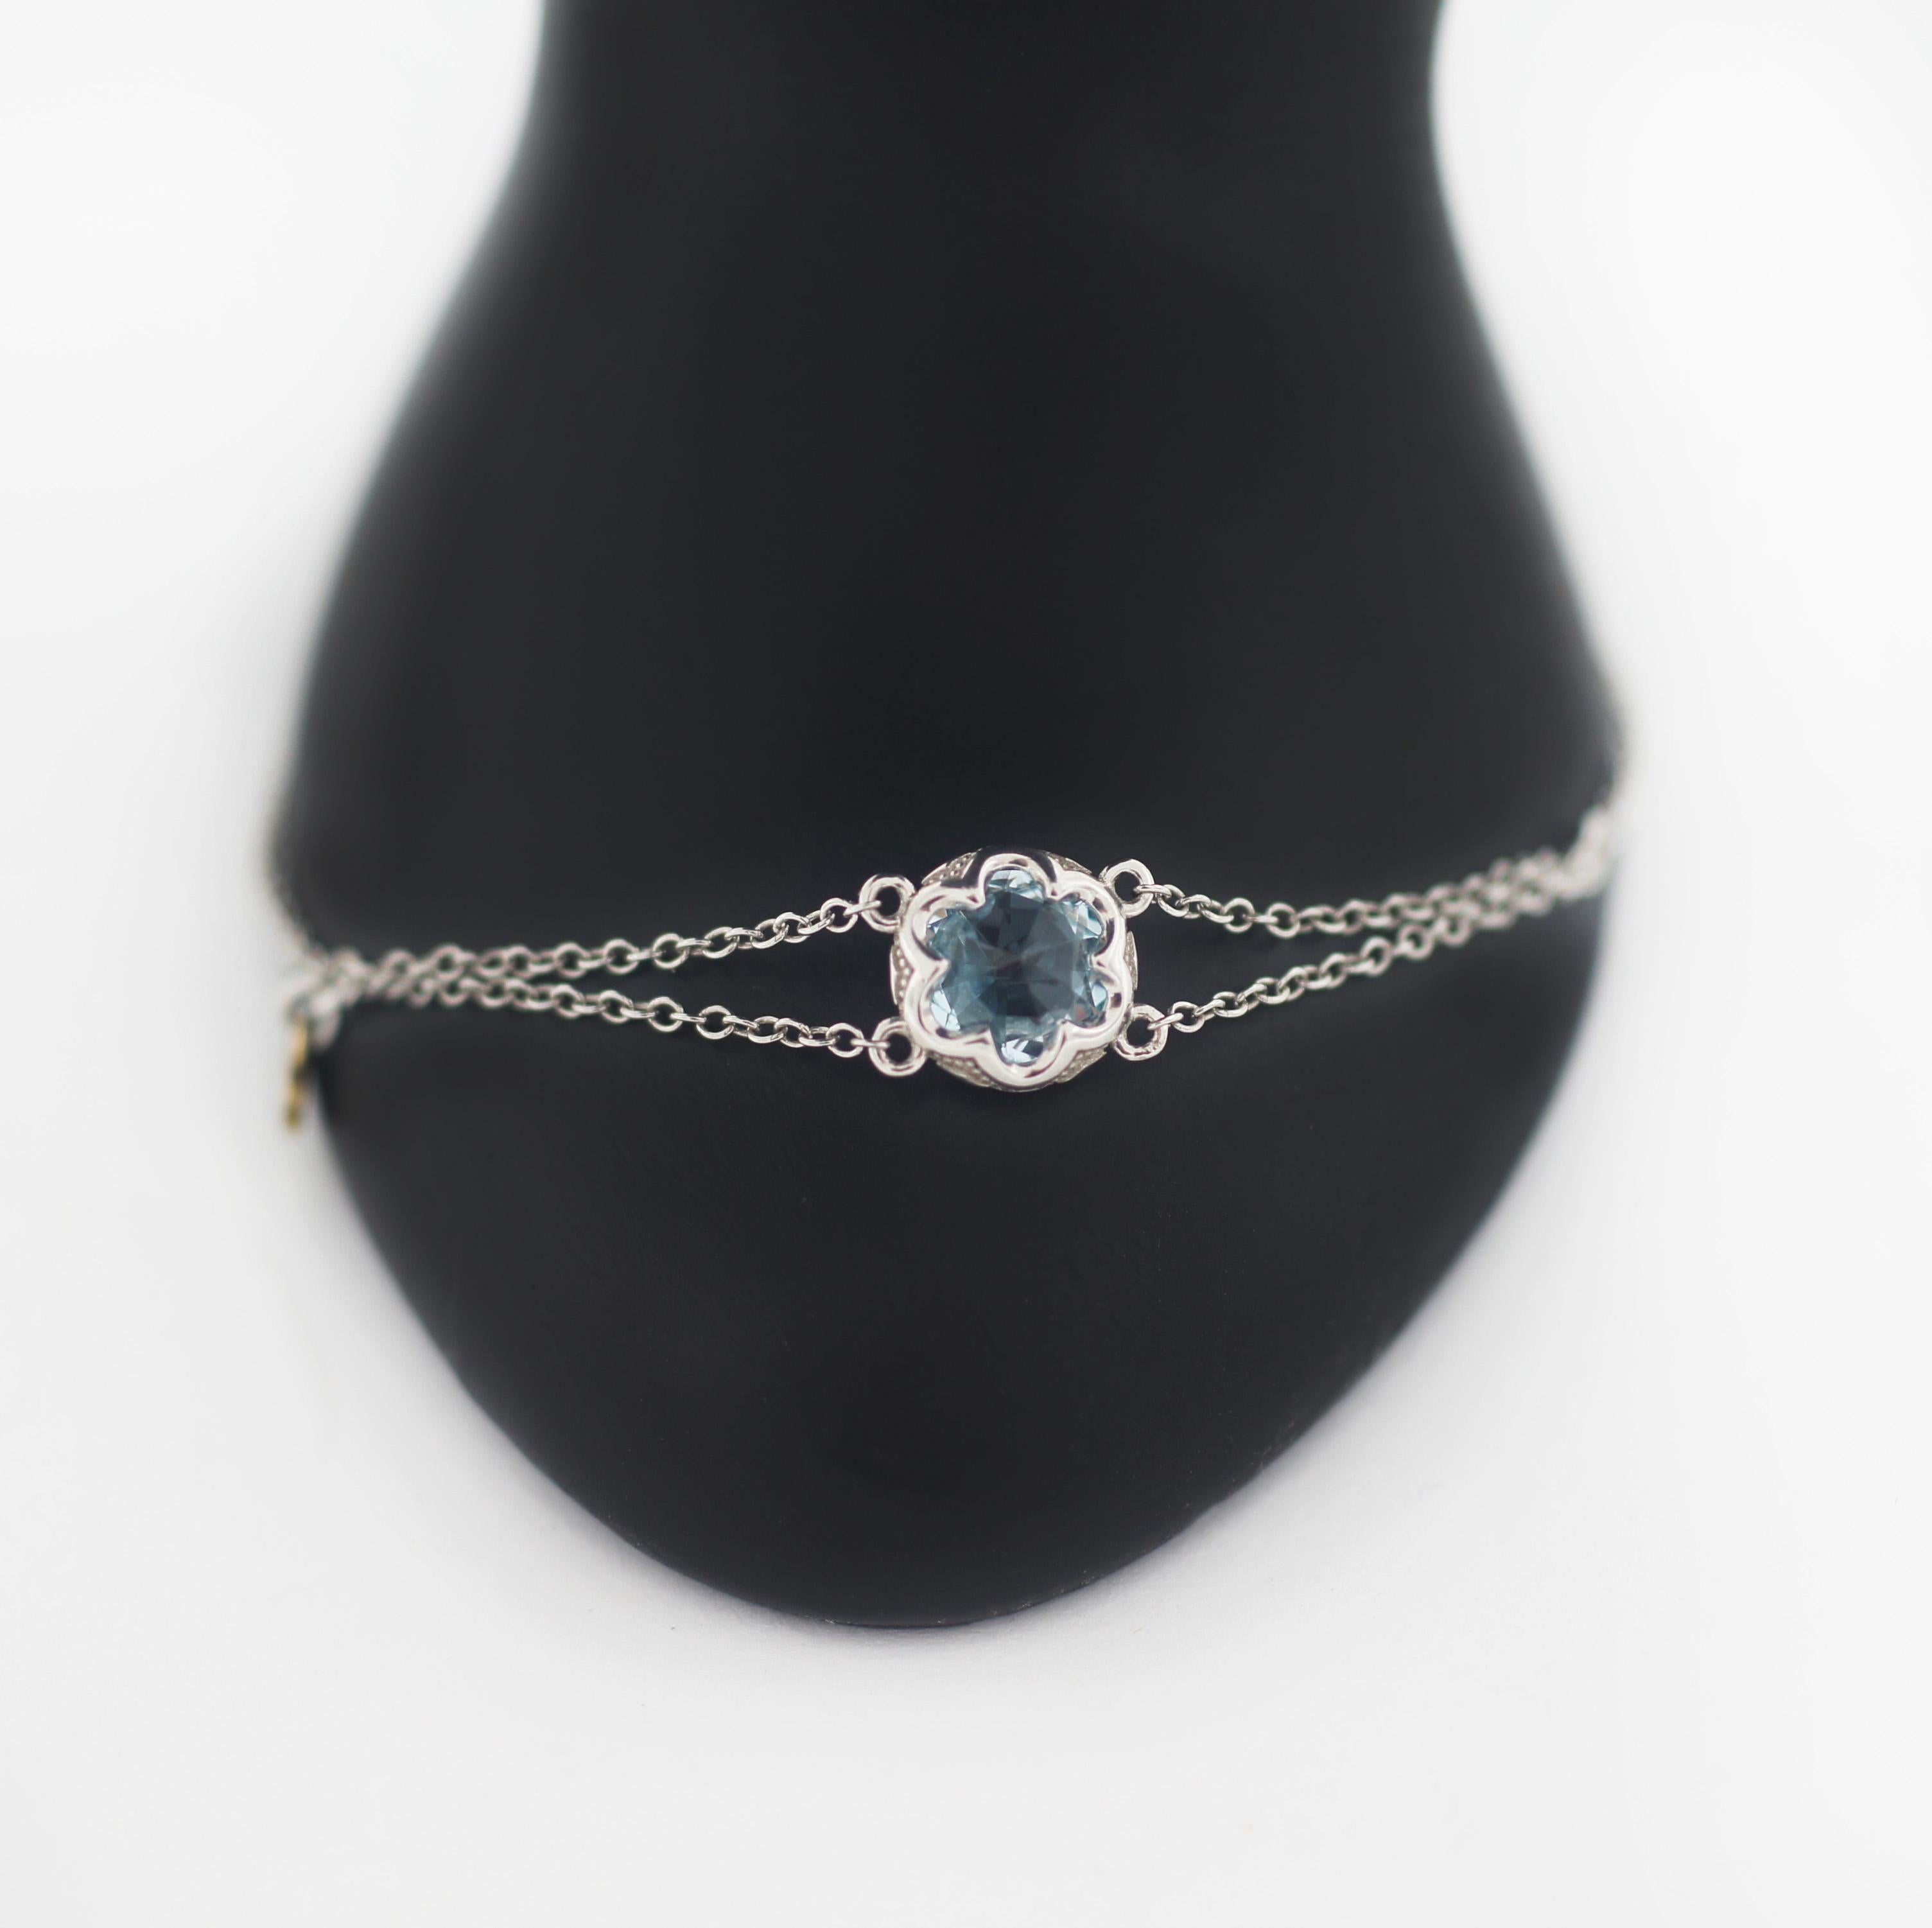 TACORI
Sonoma Kies
Style # SB20002
Beautiful Sky Blue Topaz gemstone is enveloped in a silver reverse crescent embrace and linked to the rest of the bracelet with two silver link chains on opposite ends. The petite split chain bracelet crafted from